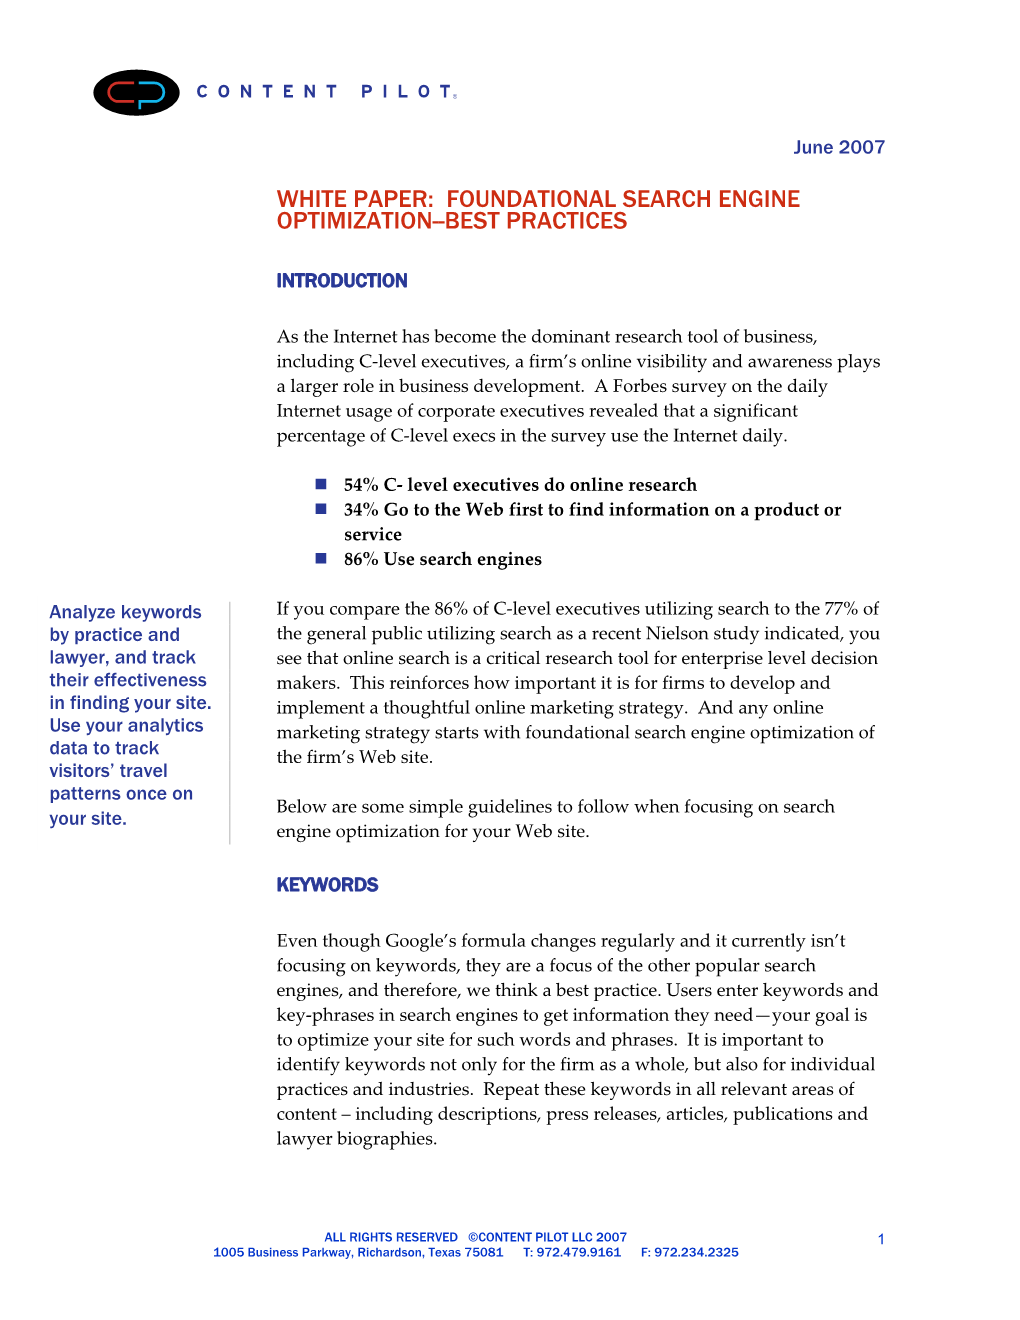 White Paper: Foundational Search Engine Optimization--Best Practices